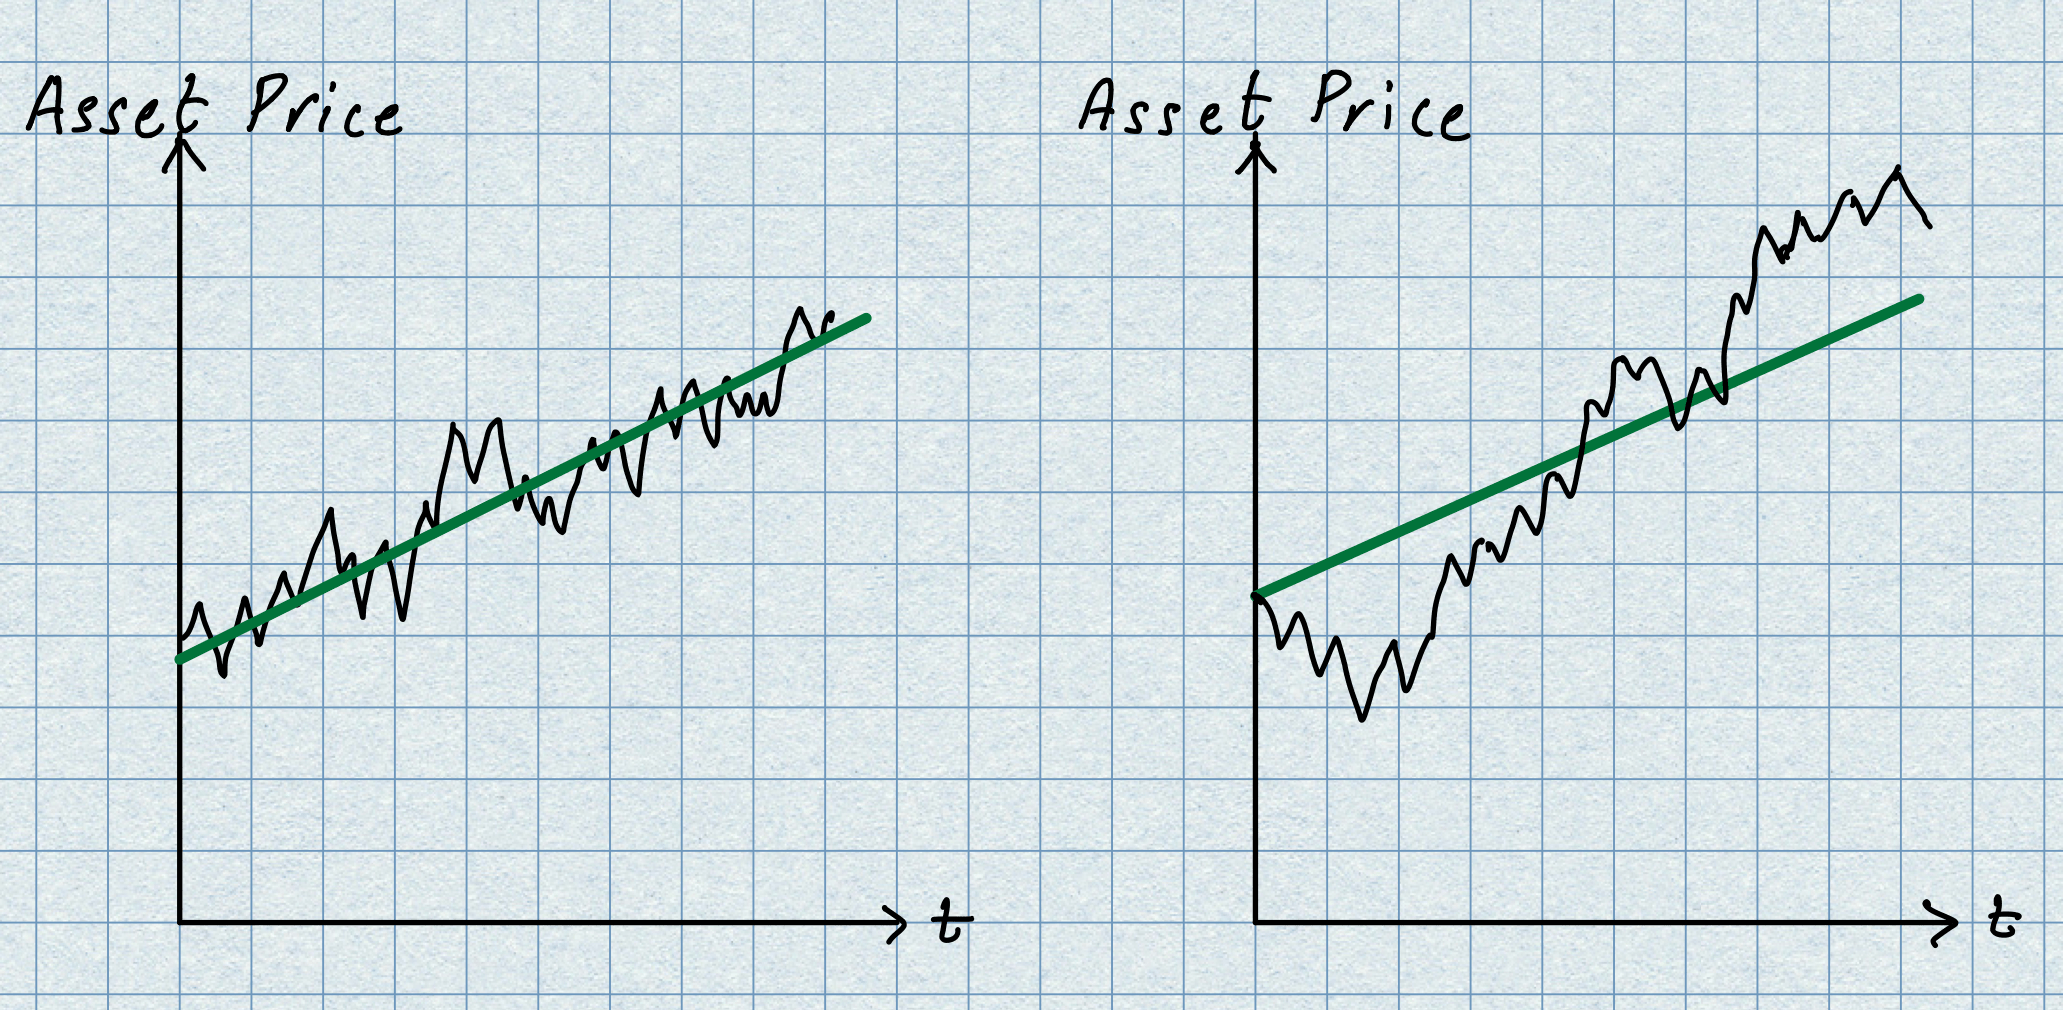 Illustration of the stock paths